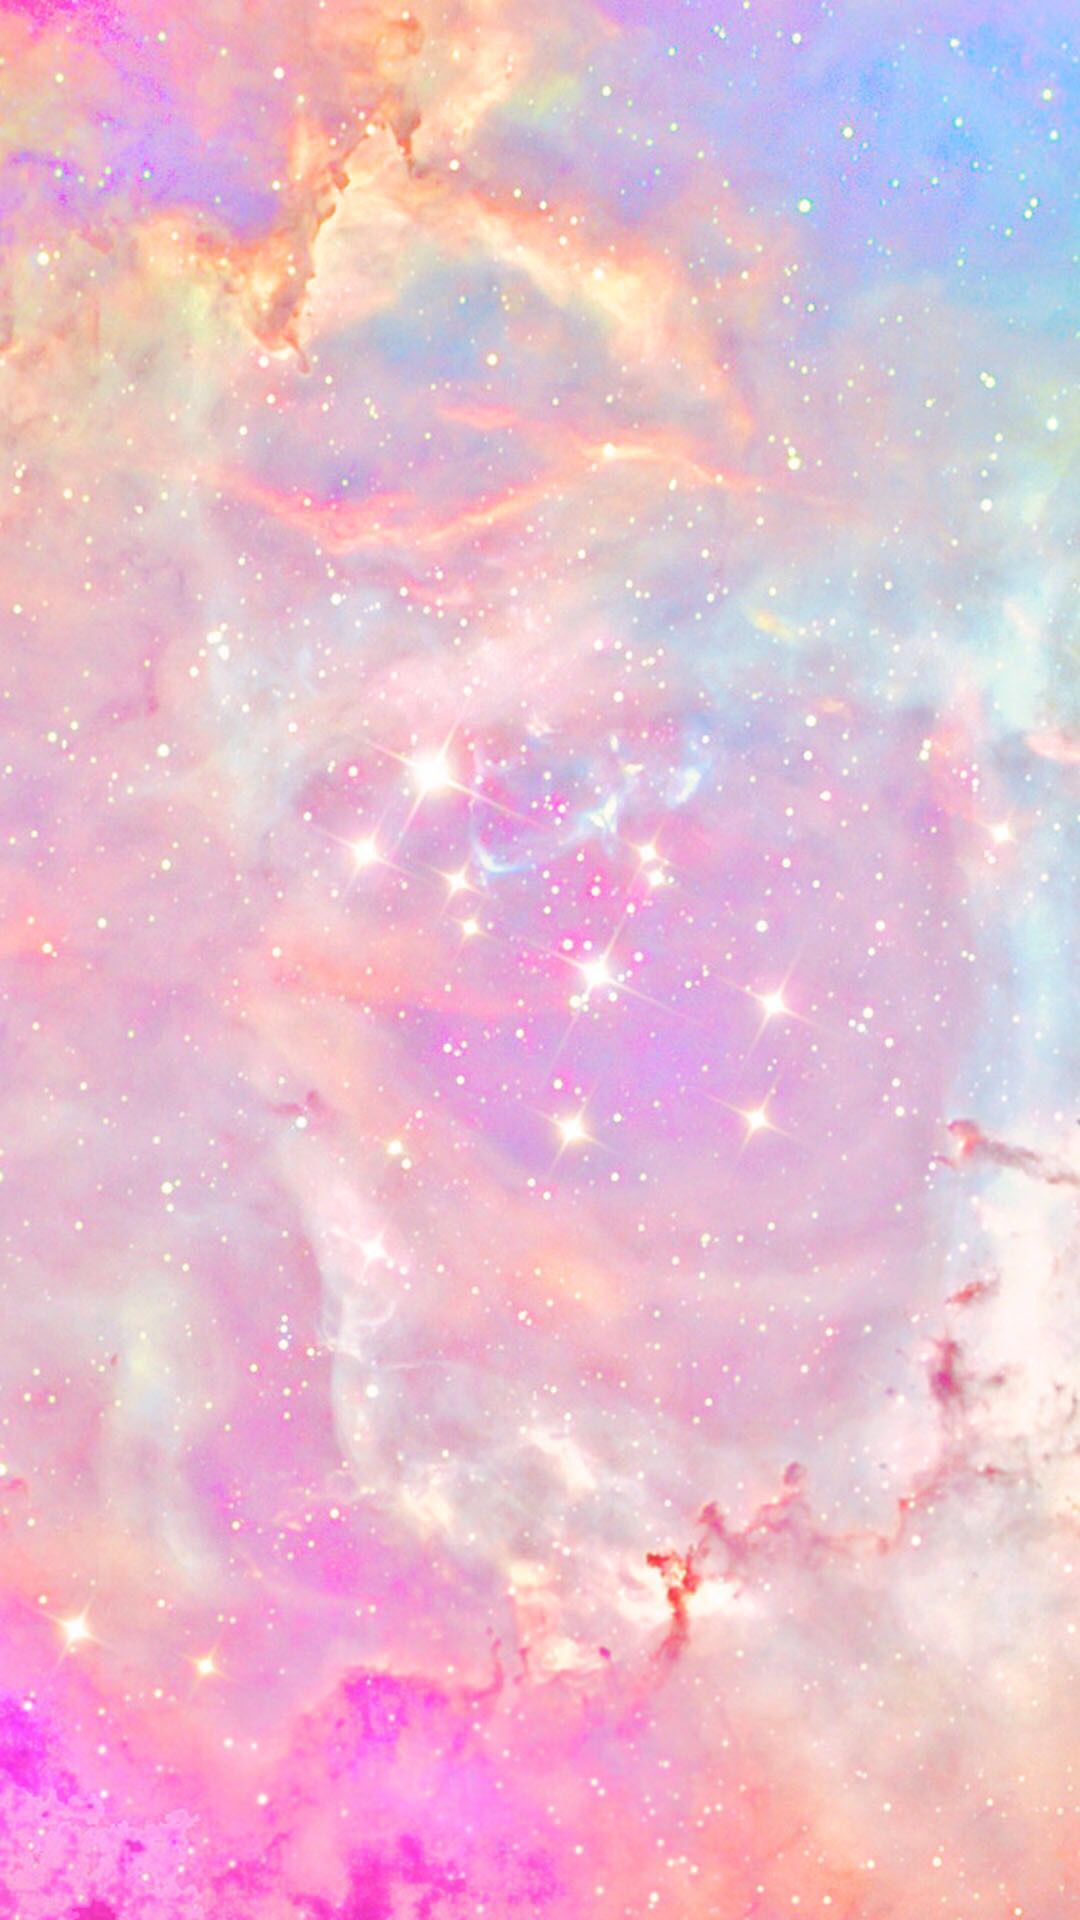 Girly outer space. Galaxy wallpaper iphone, Pretty wallpaper